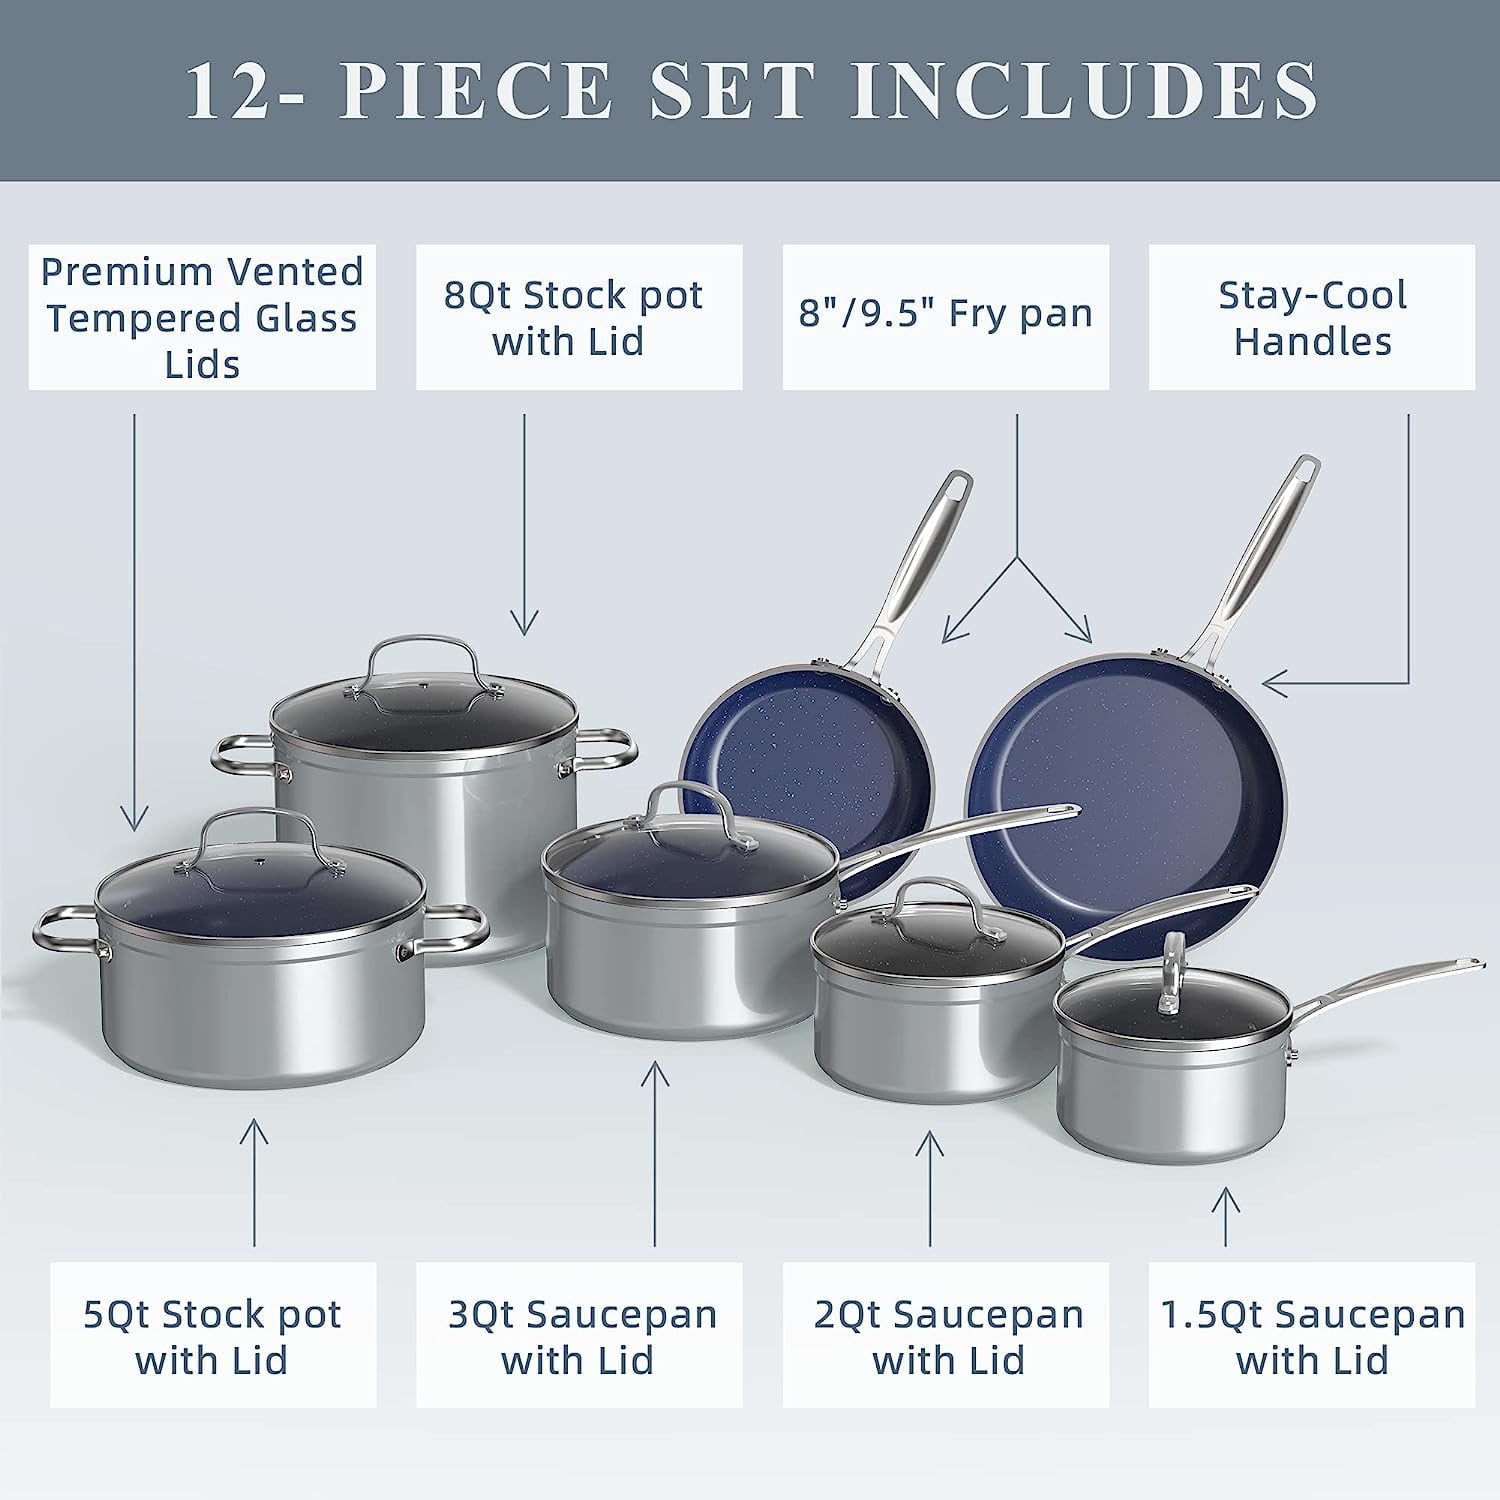 Nuwave 3-quart Grill Pan with Tempered Glass Lid, Forged Lightweight, G10  Healthy Duralon Blue Ceramic Ultra Non-Stick Coating, Oven and